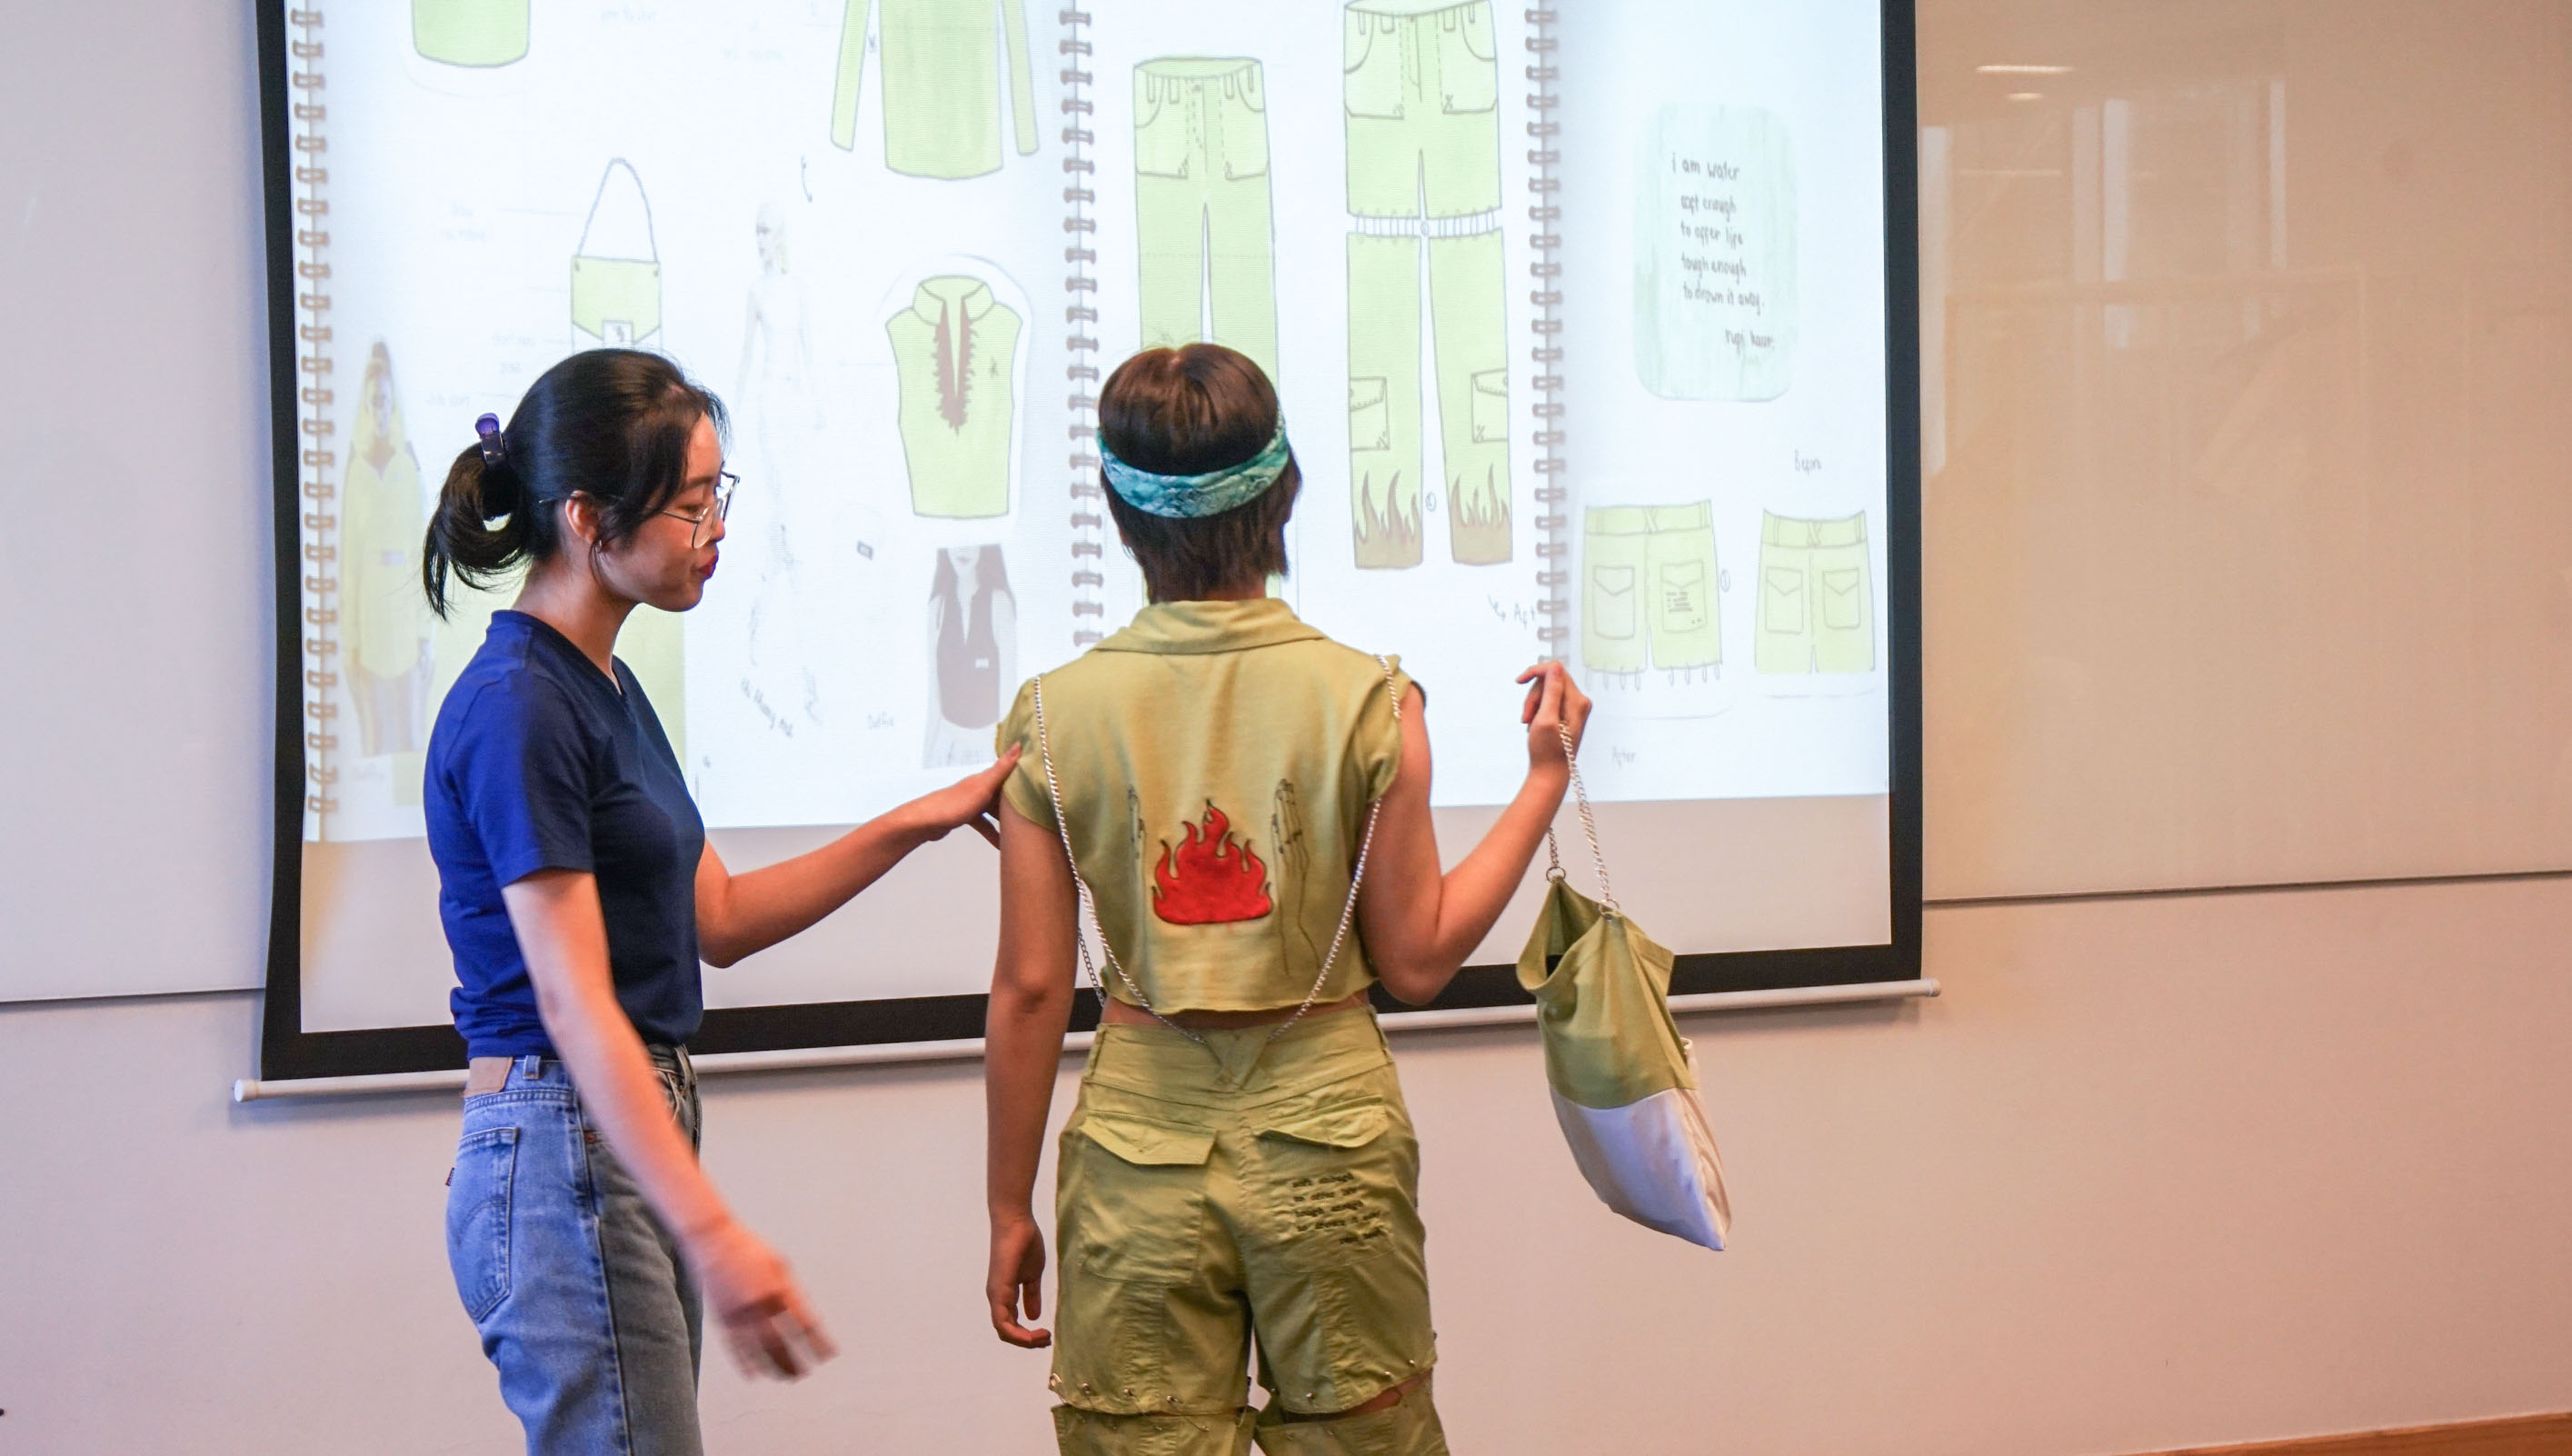 Students showcased their work to a panel of H&M representatives, as well as RMIT Vietnam Head of Design Professor Julia Gaimster, Fashion Discipline Lead Nina Yiu and Fashion Senior Lecturer Dr Rajkishore Nayak.